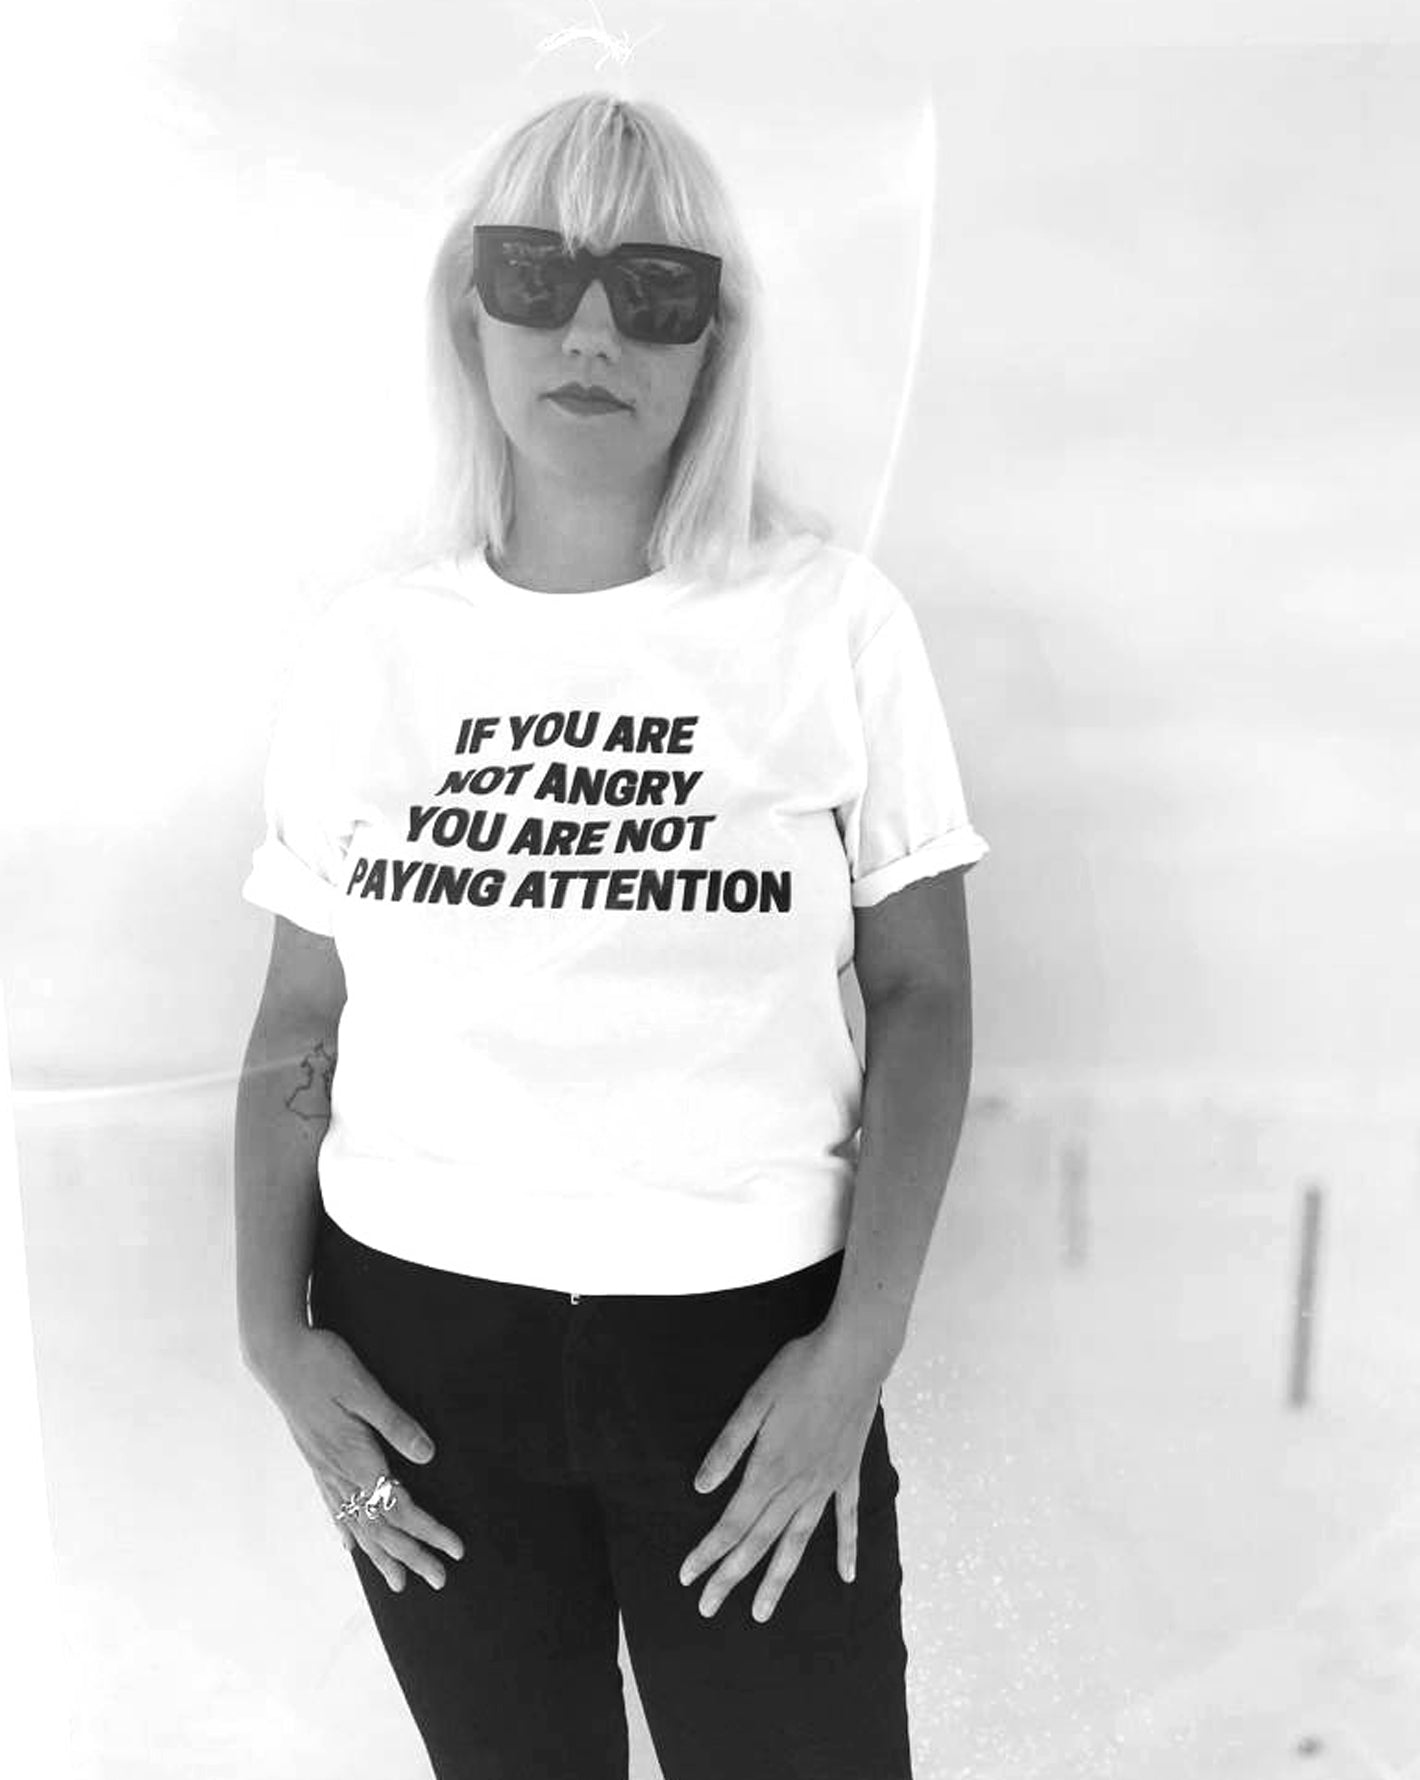 Jean Friot wearing The Frankie Shop x Jeanne Friot if you T-Shirt.